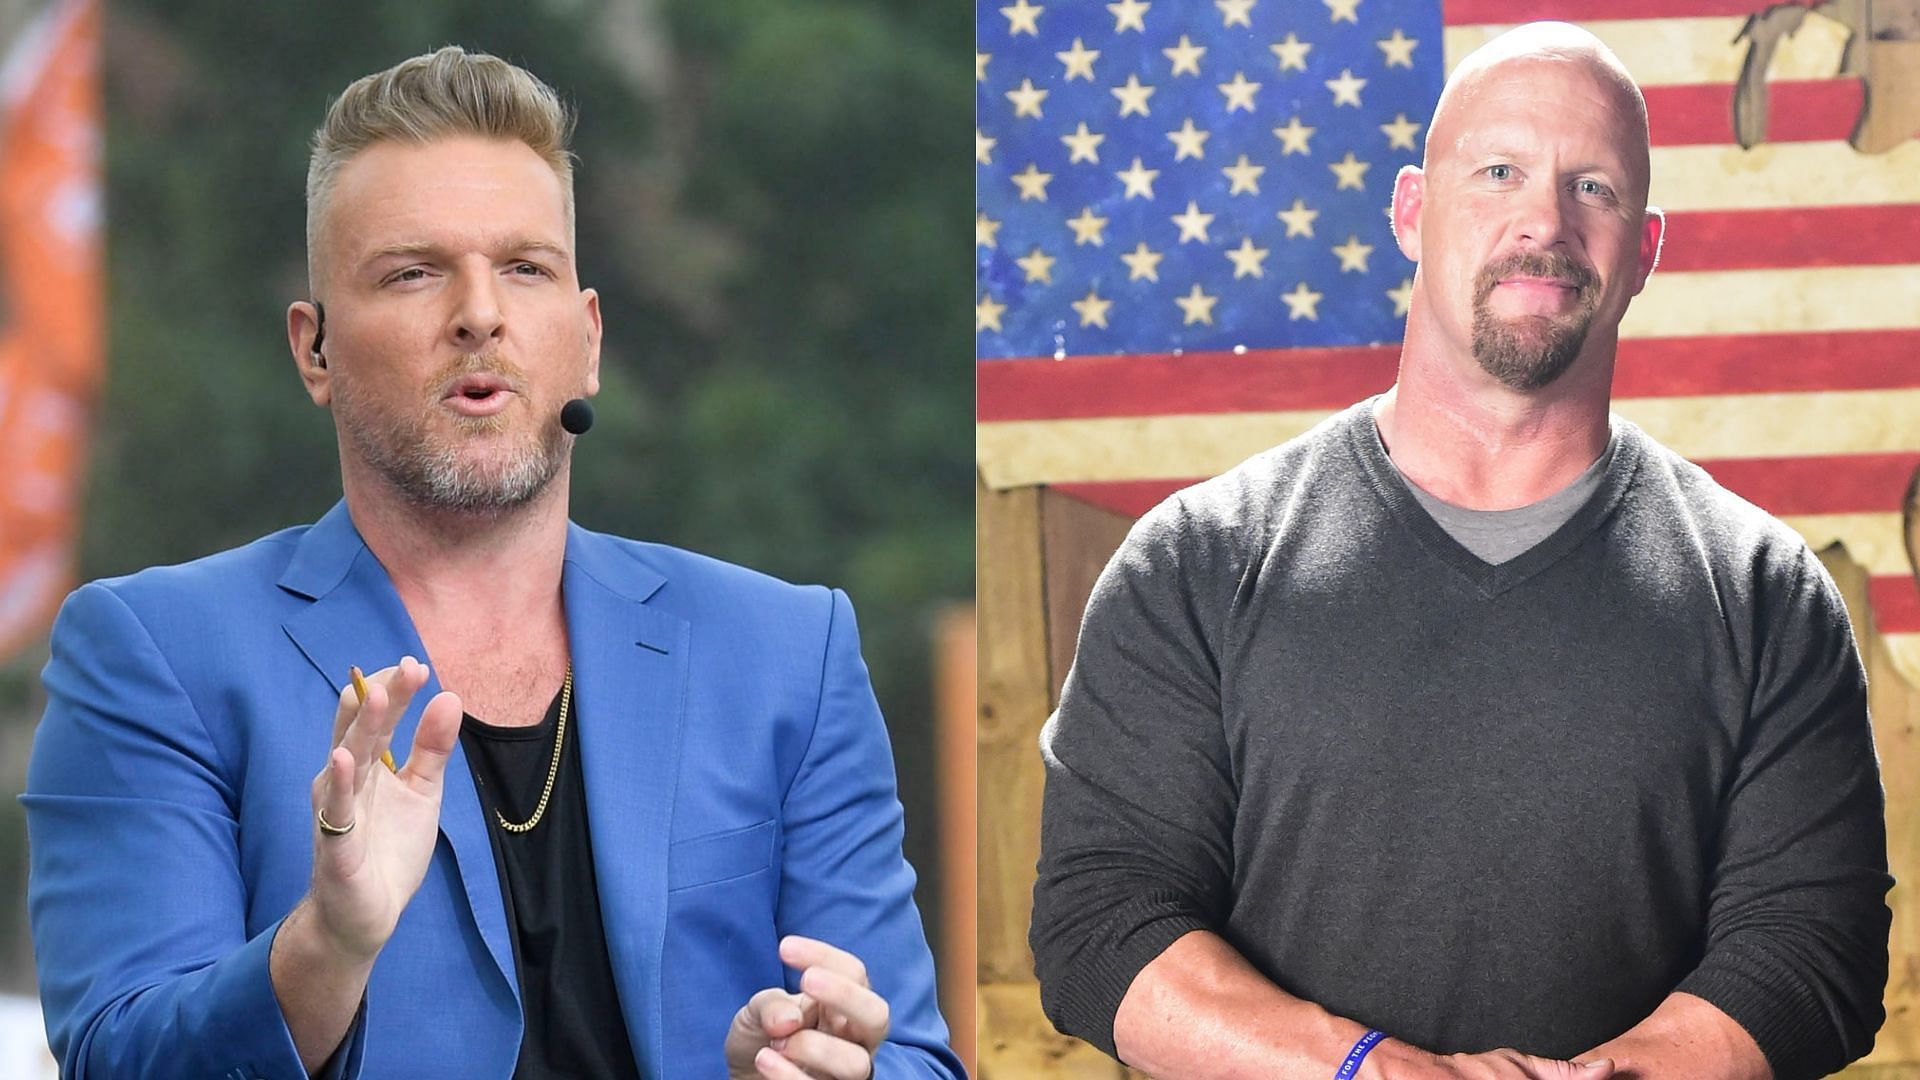 Pat McAfee (L) has star potential in WWE according to HOF Stone Cold Steve Austin (R)